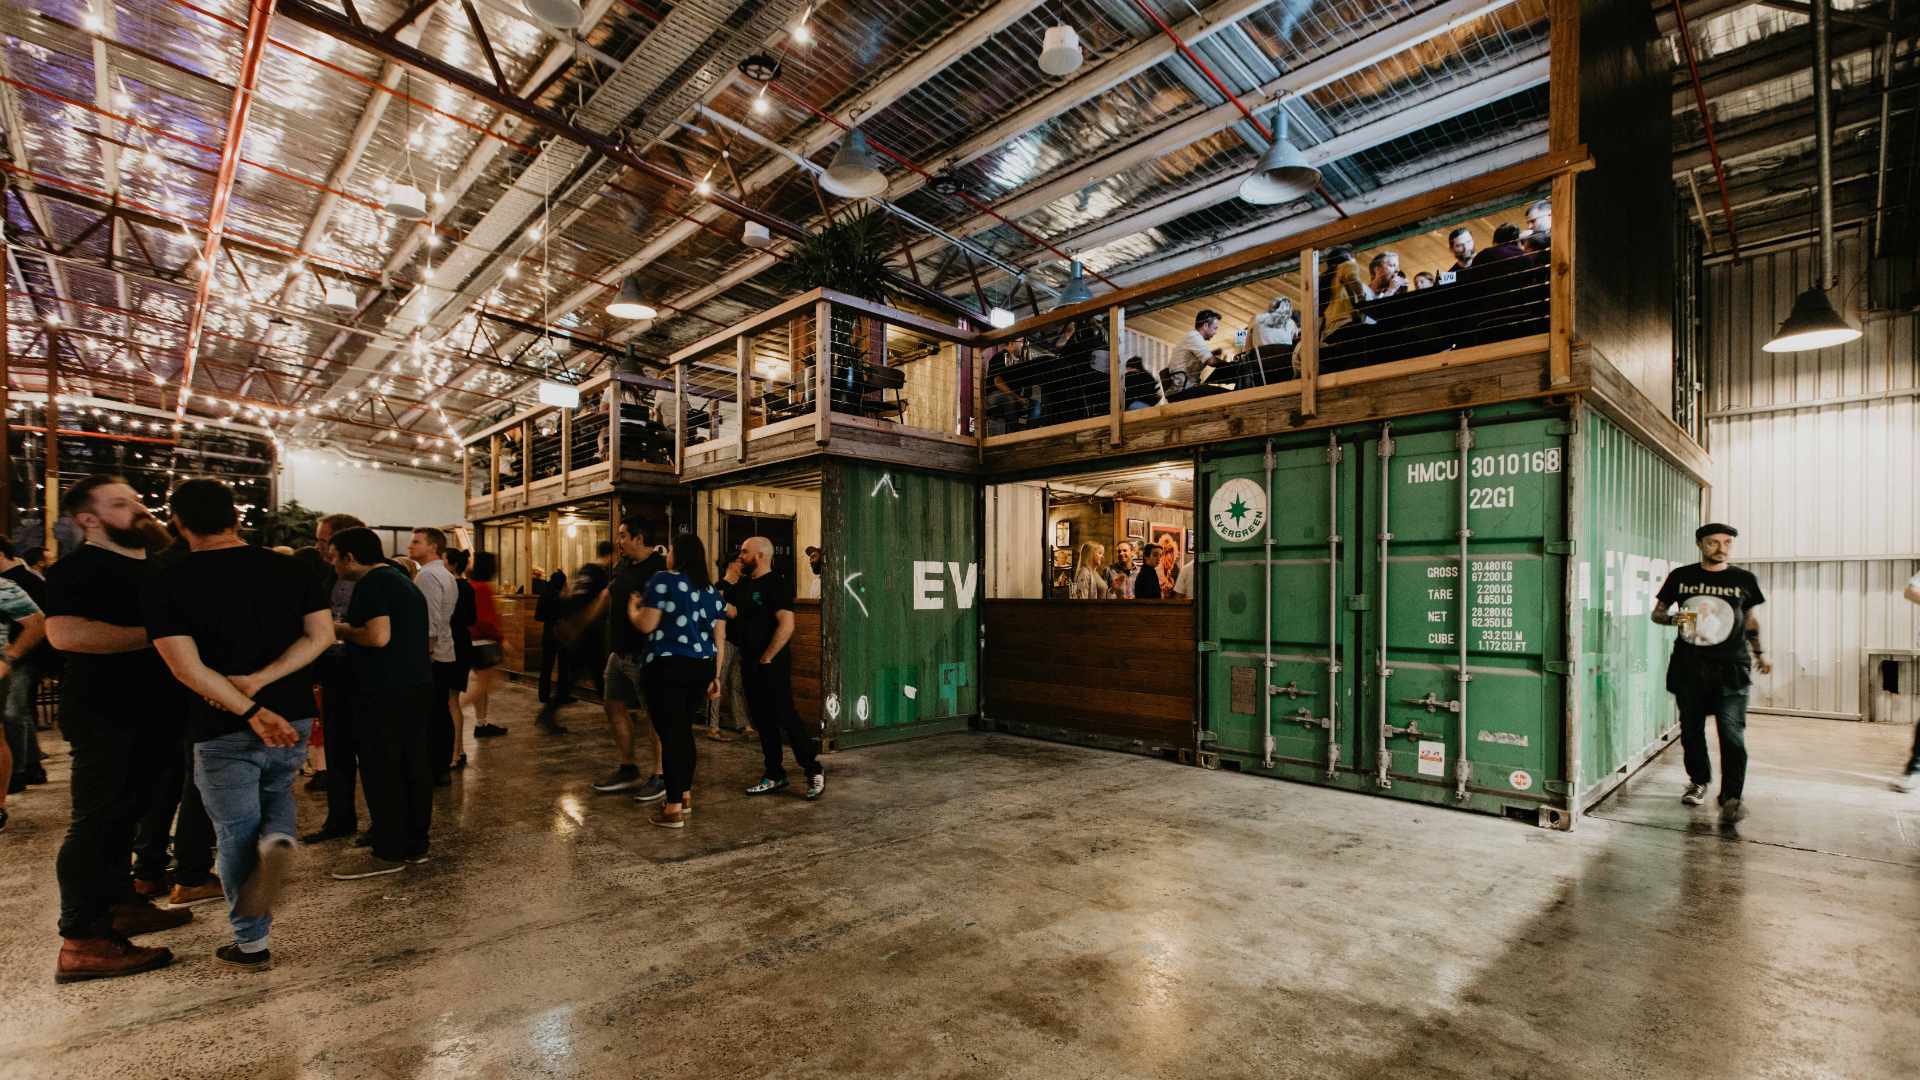 Moon Dog's Huge New Melbourne Bar Is the Most Over-the-Top Brewery in Australia